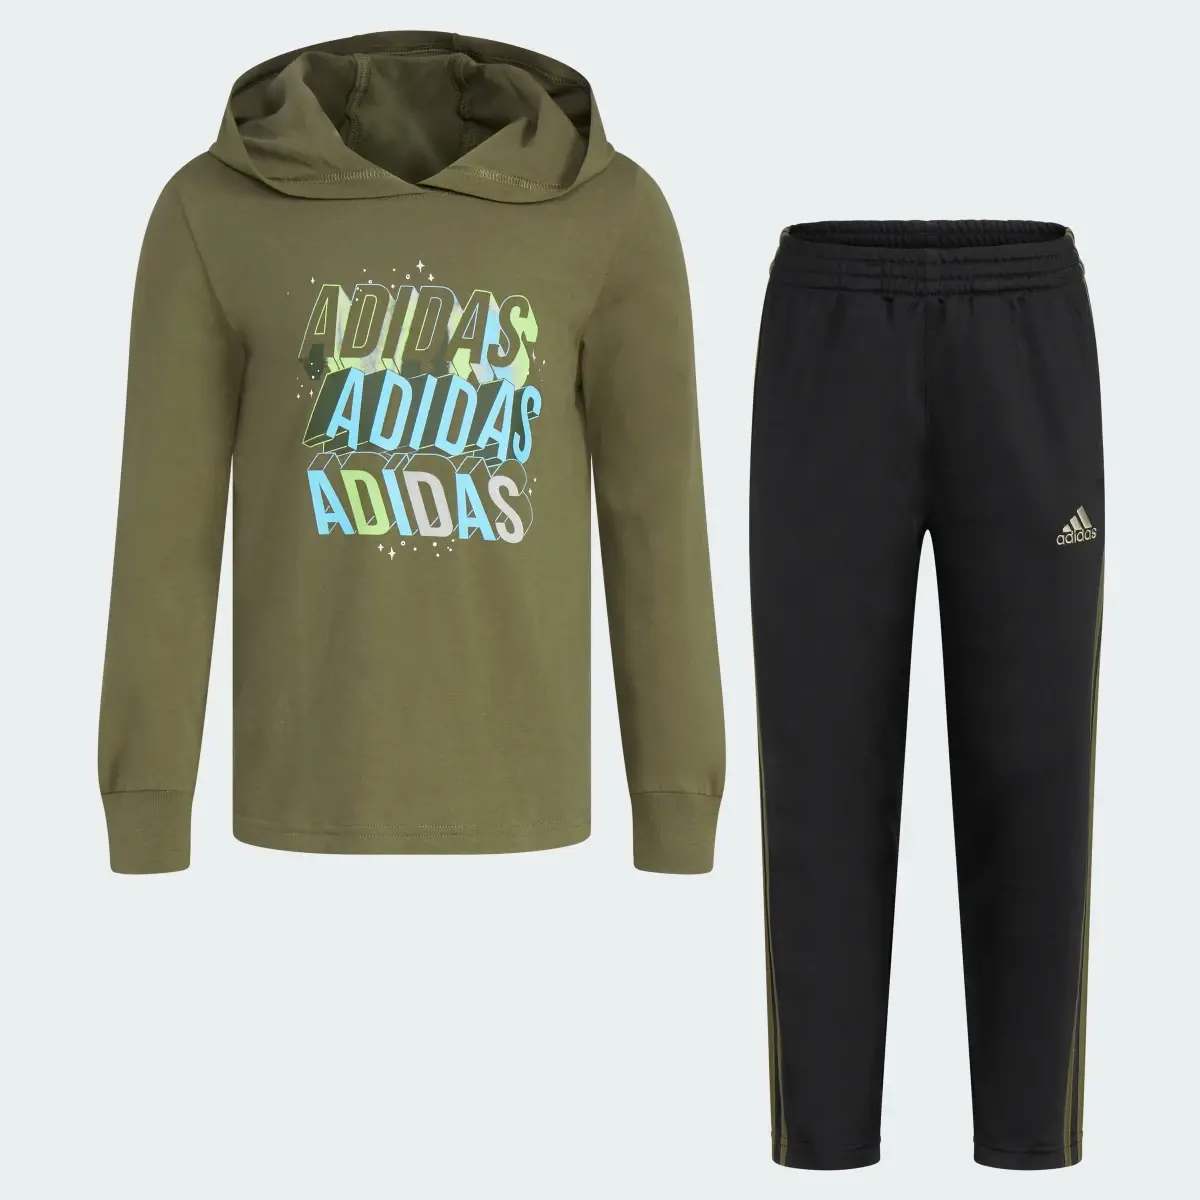 Adidas Two-Piece Long Sleeve Graphic Hooded Tee and Pant Set. 3